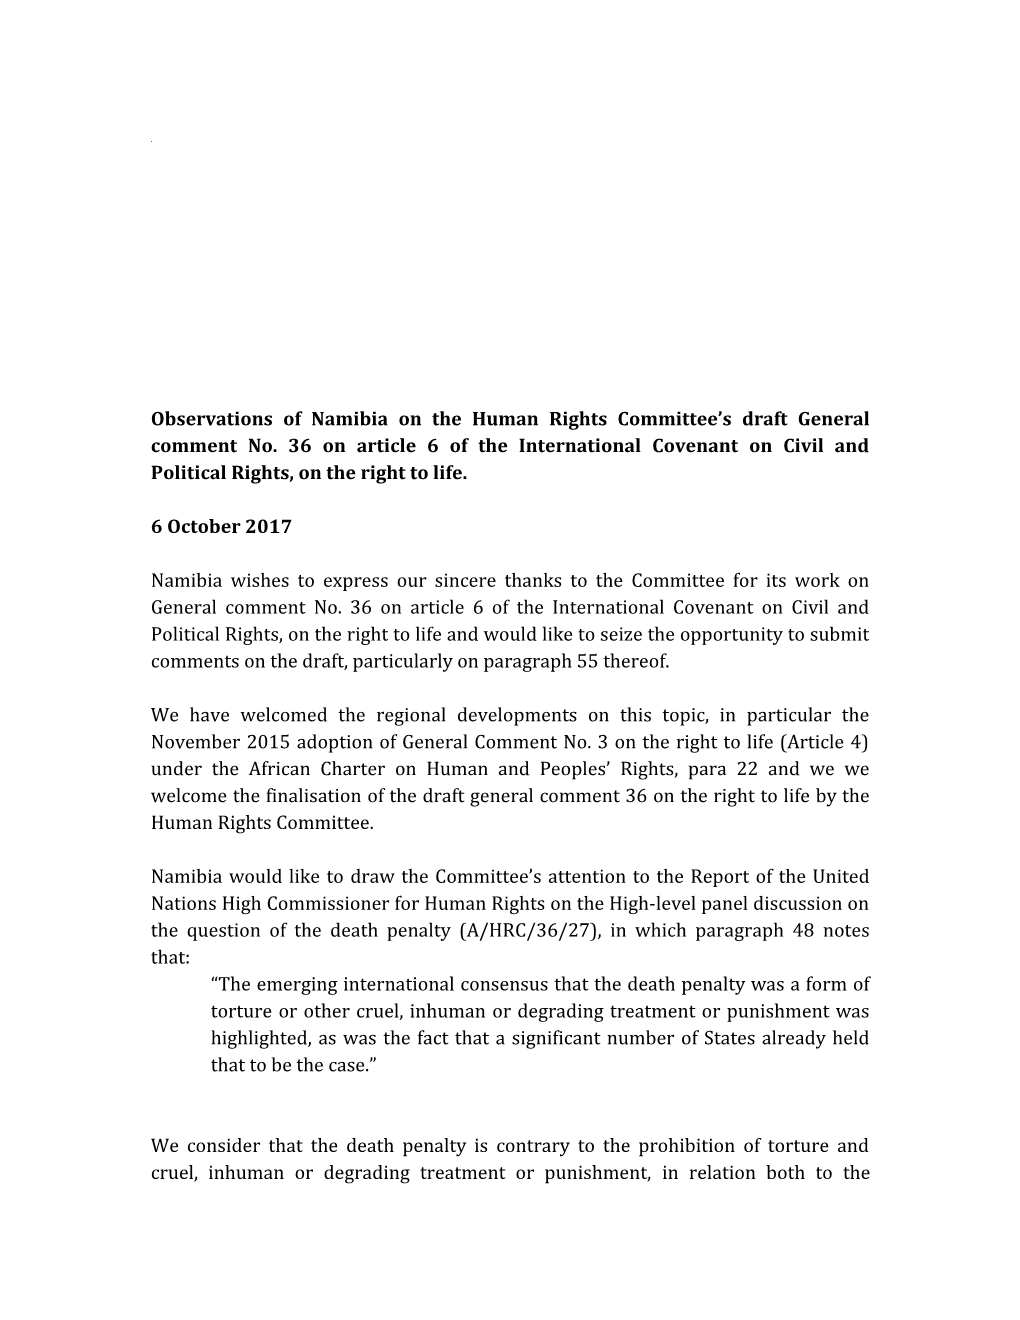 Observations of Namibia on the Human Rights Committee S Draft General Comment No. 36 On